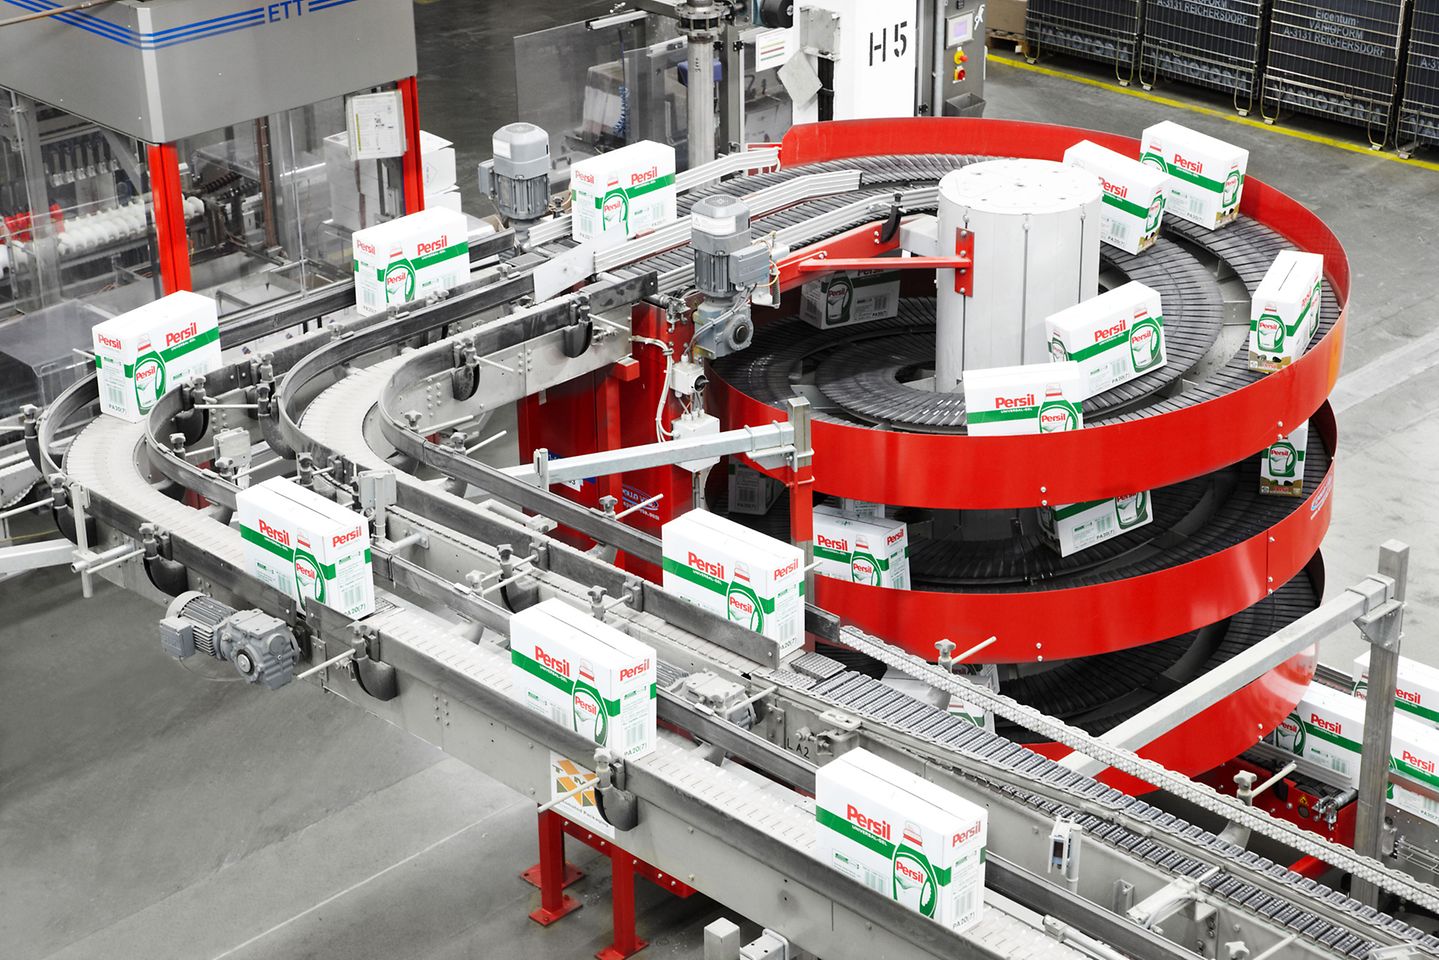 A bird's eye view of an assembly line in the Persil production